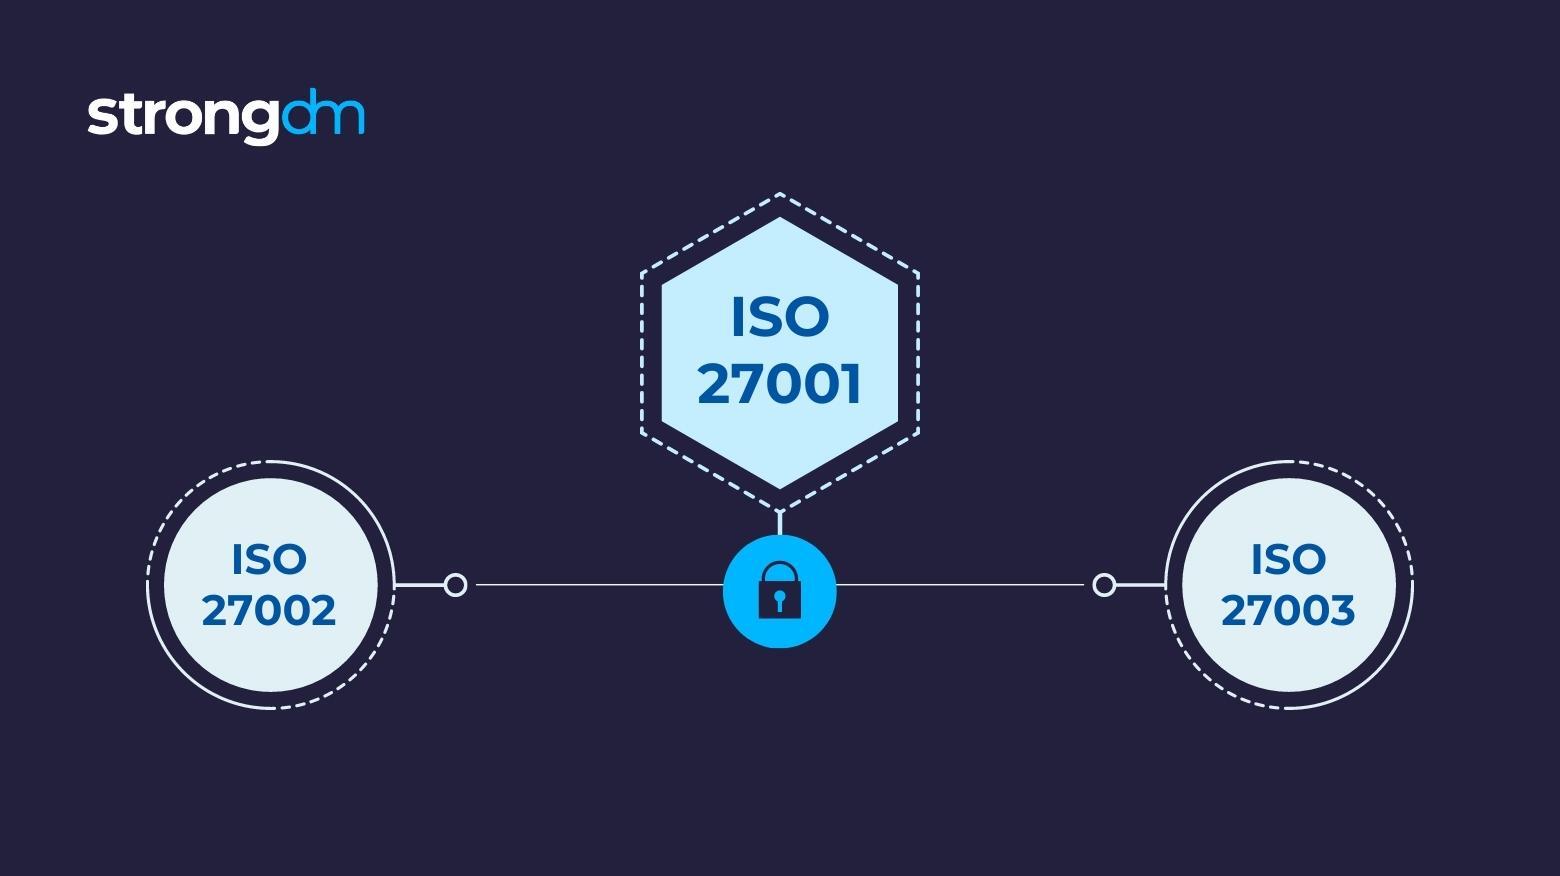 ISO 27001 vs. 27002 vs. 27003: What’s the Difference?